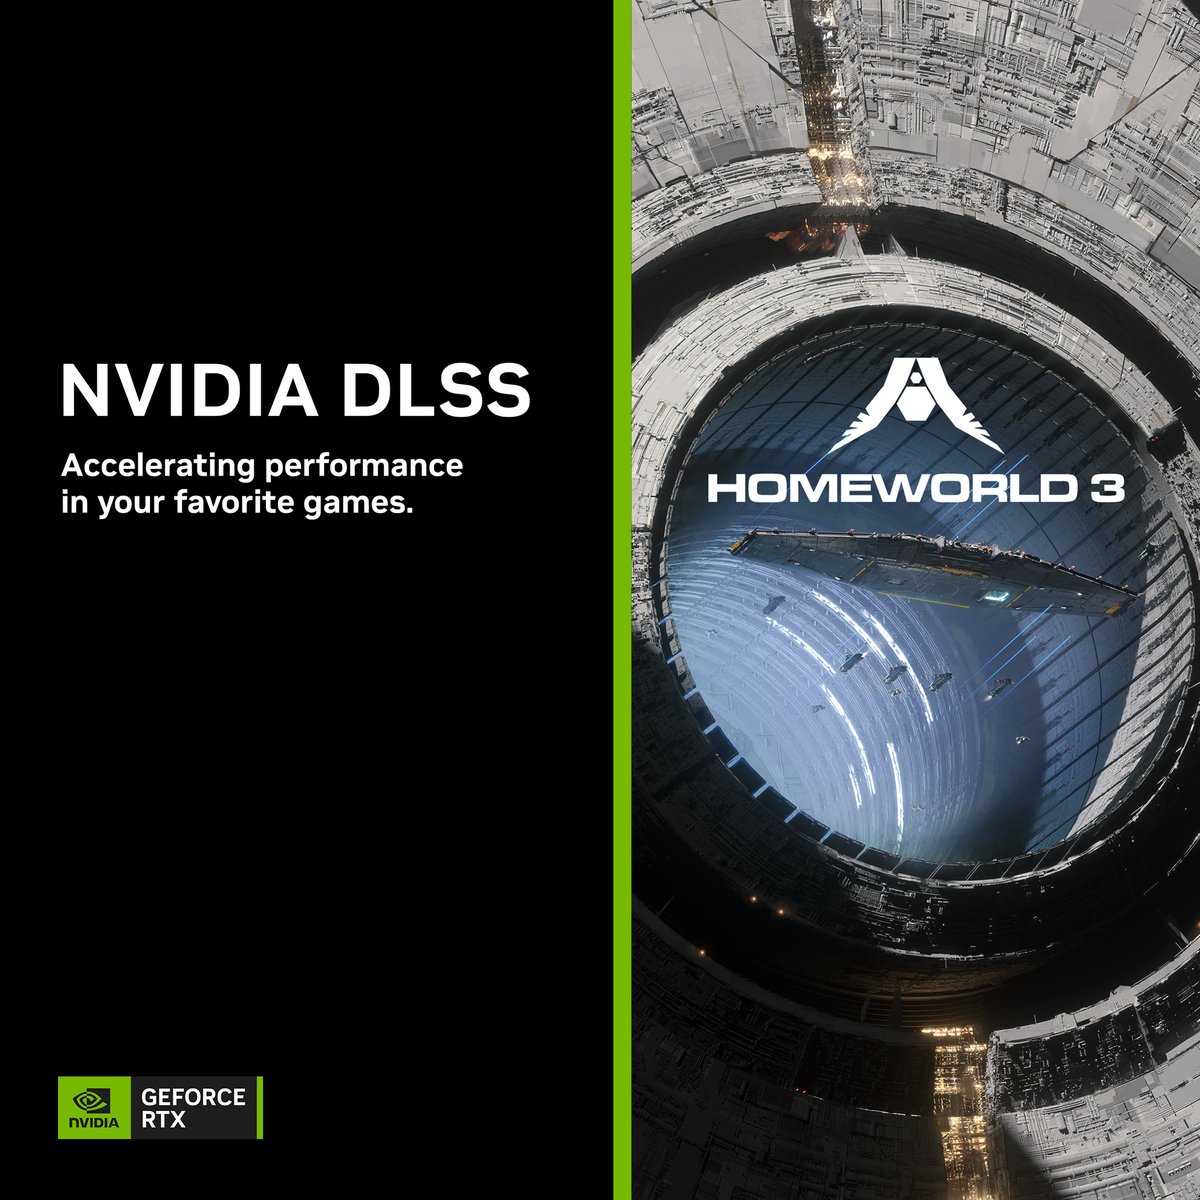 NVIDIA DLSS is accelerating performance in more of your favorite games including the long-awaited Homeworld 3, available starting May 10th with DLSS 2. 🚀 + More DLSS games → nvda.ws/4b7o502